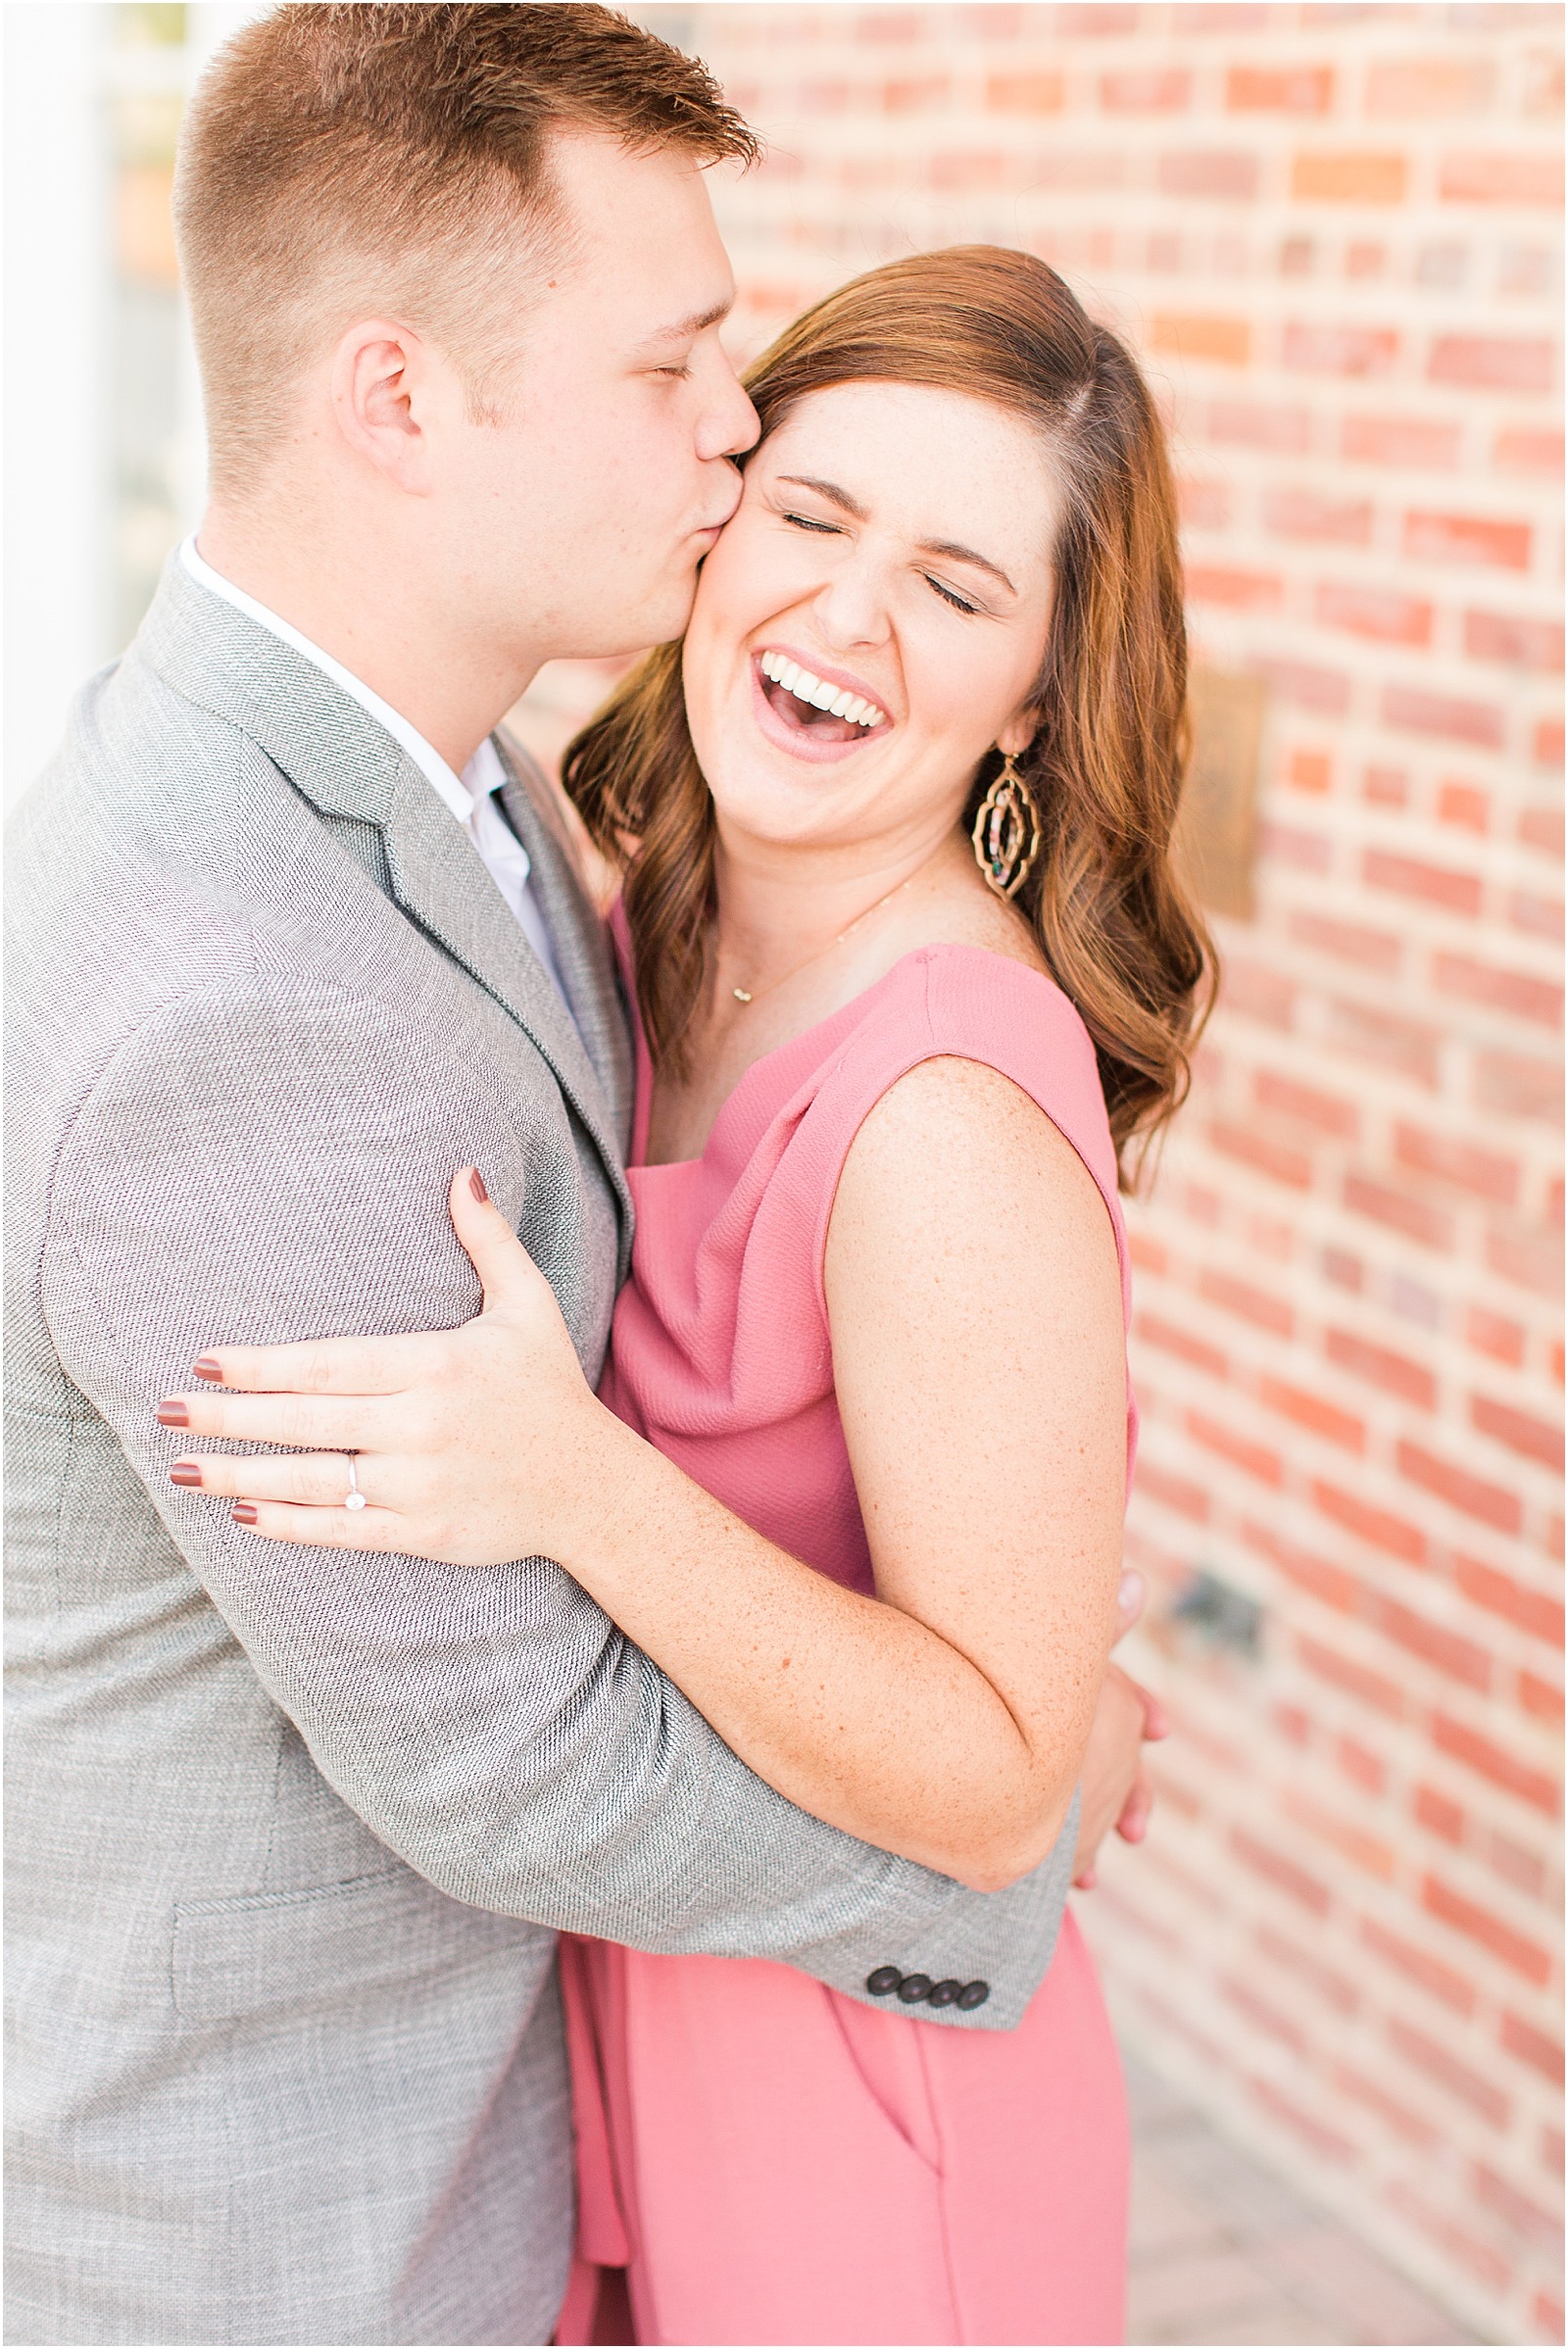 Downtown Huntingburgh Engagement Session | Gabby and Aidan | Bret and Brtandie Photography 004.jpg